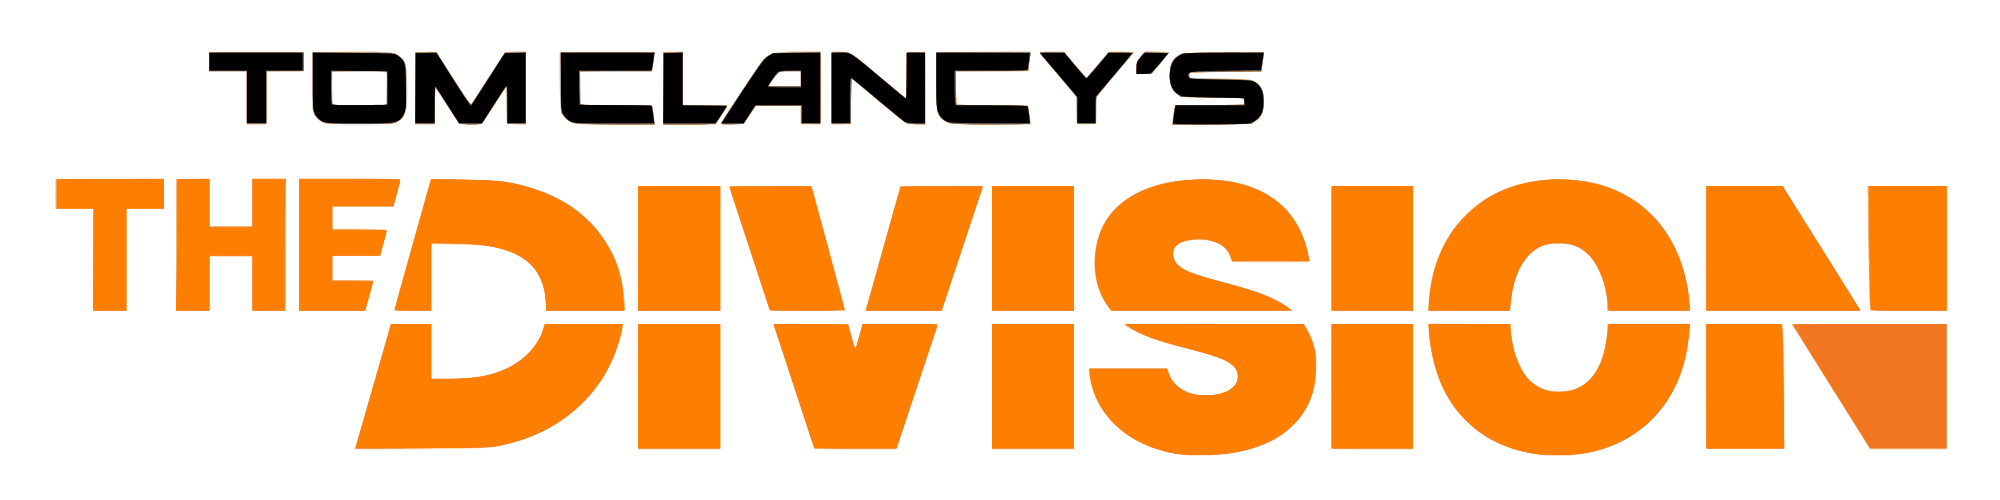 The Division Logo - File:Tom Clancy's The Division – Game logo.svg - Wikimedia Commons